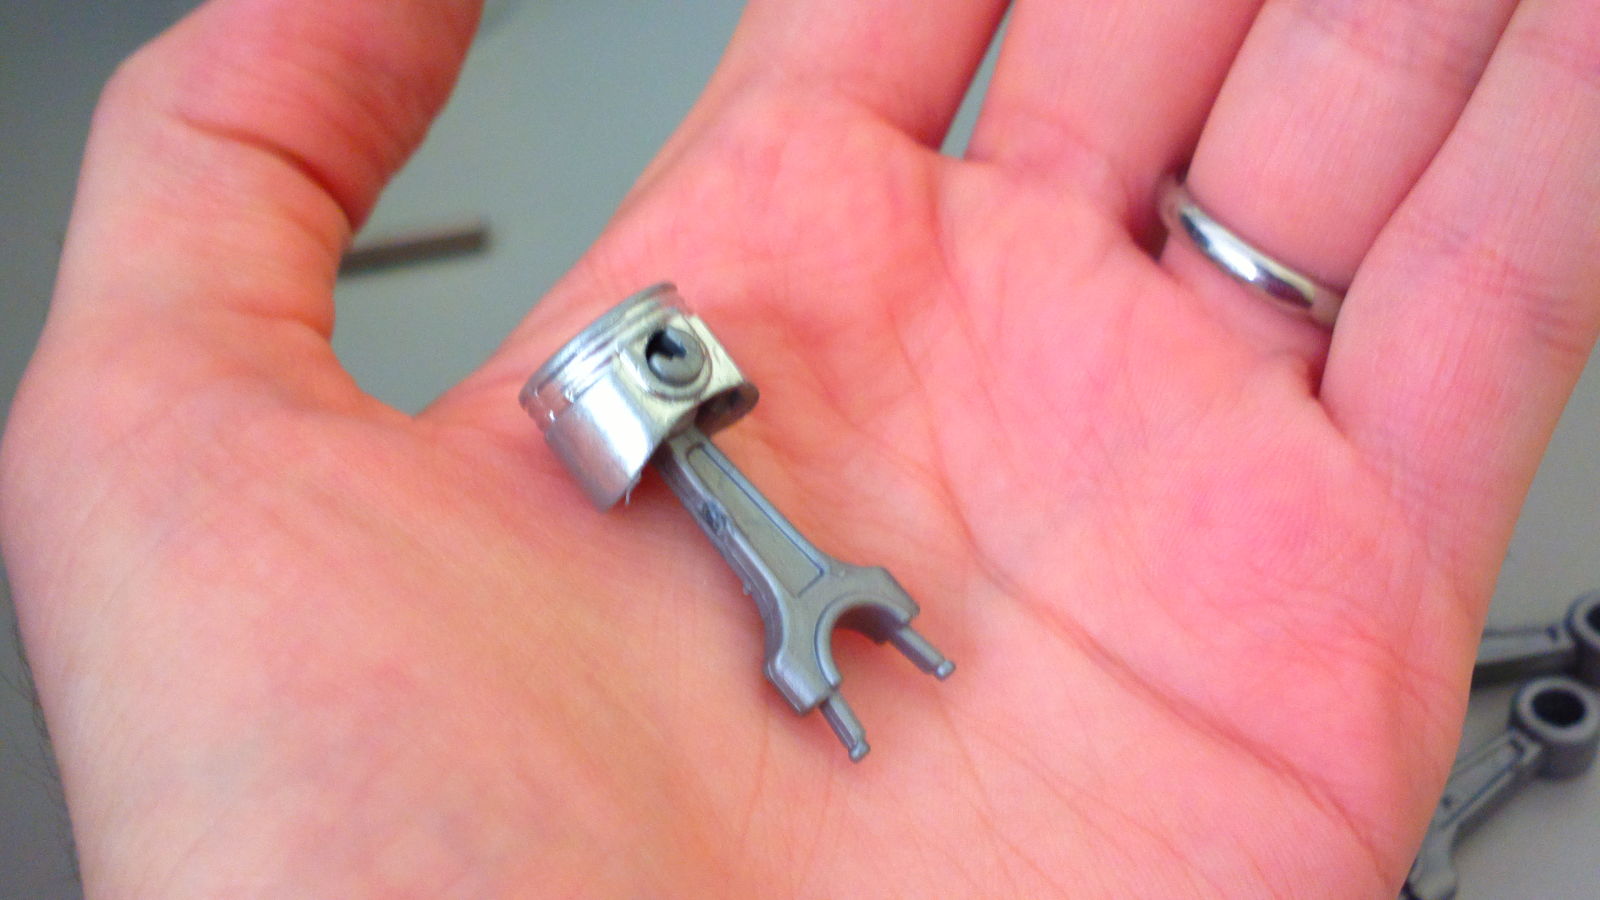 Look how tiny and cute this little piston is!